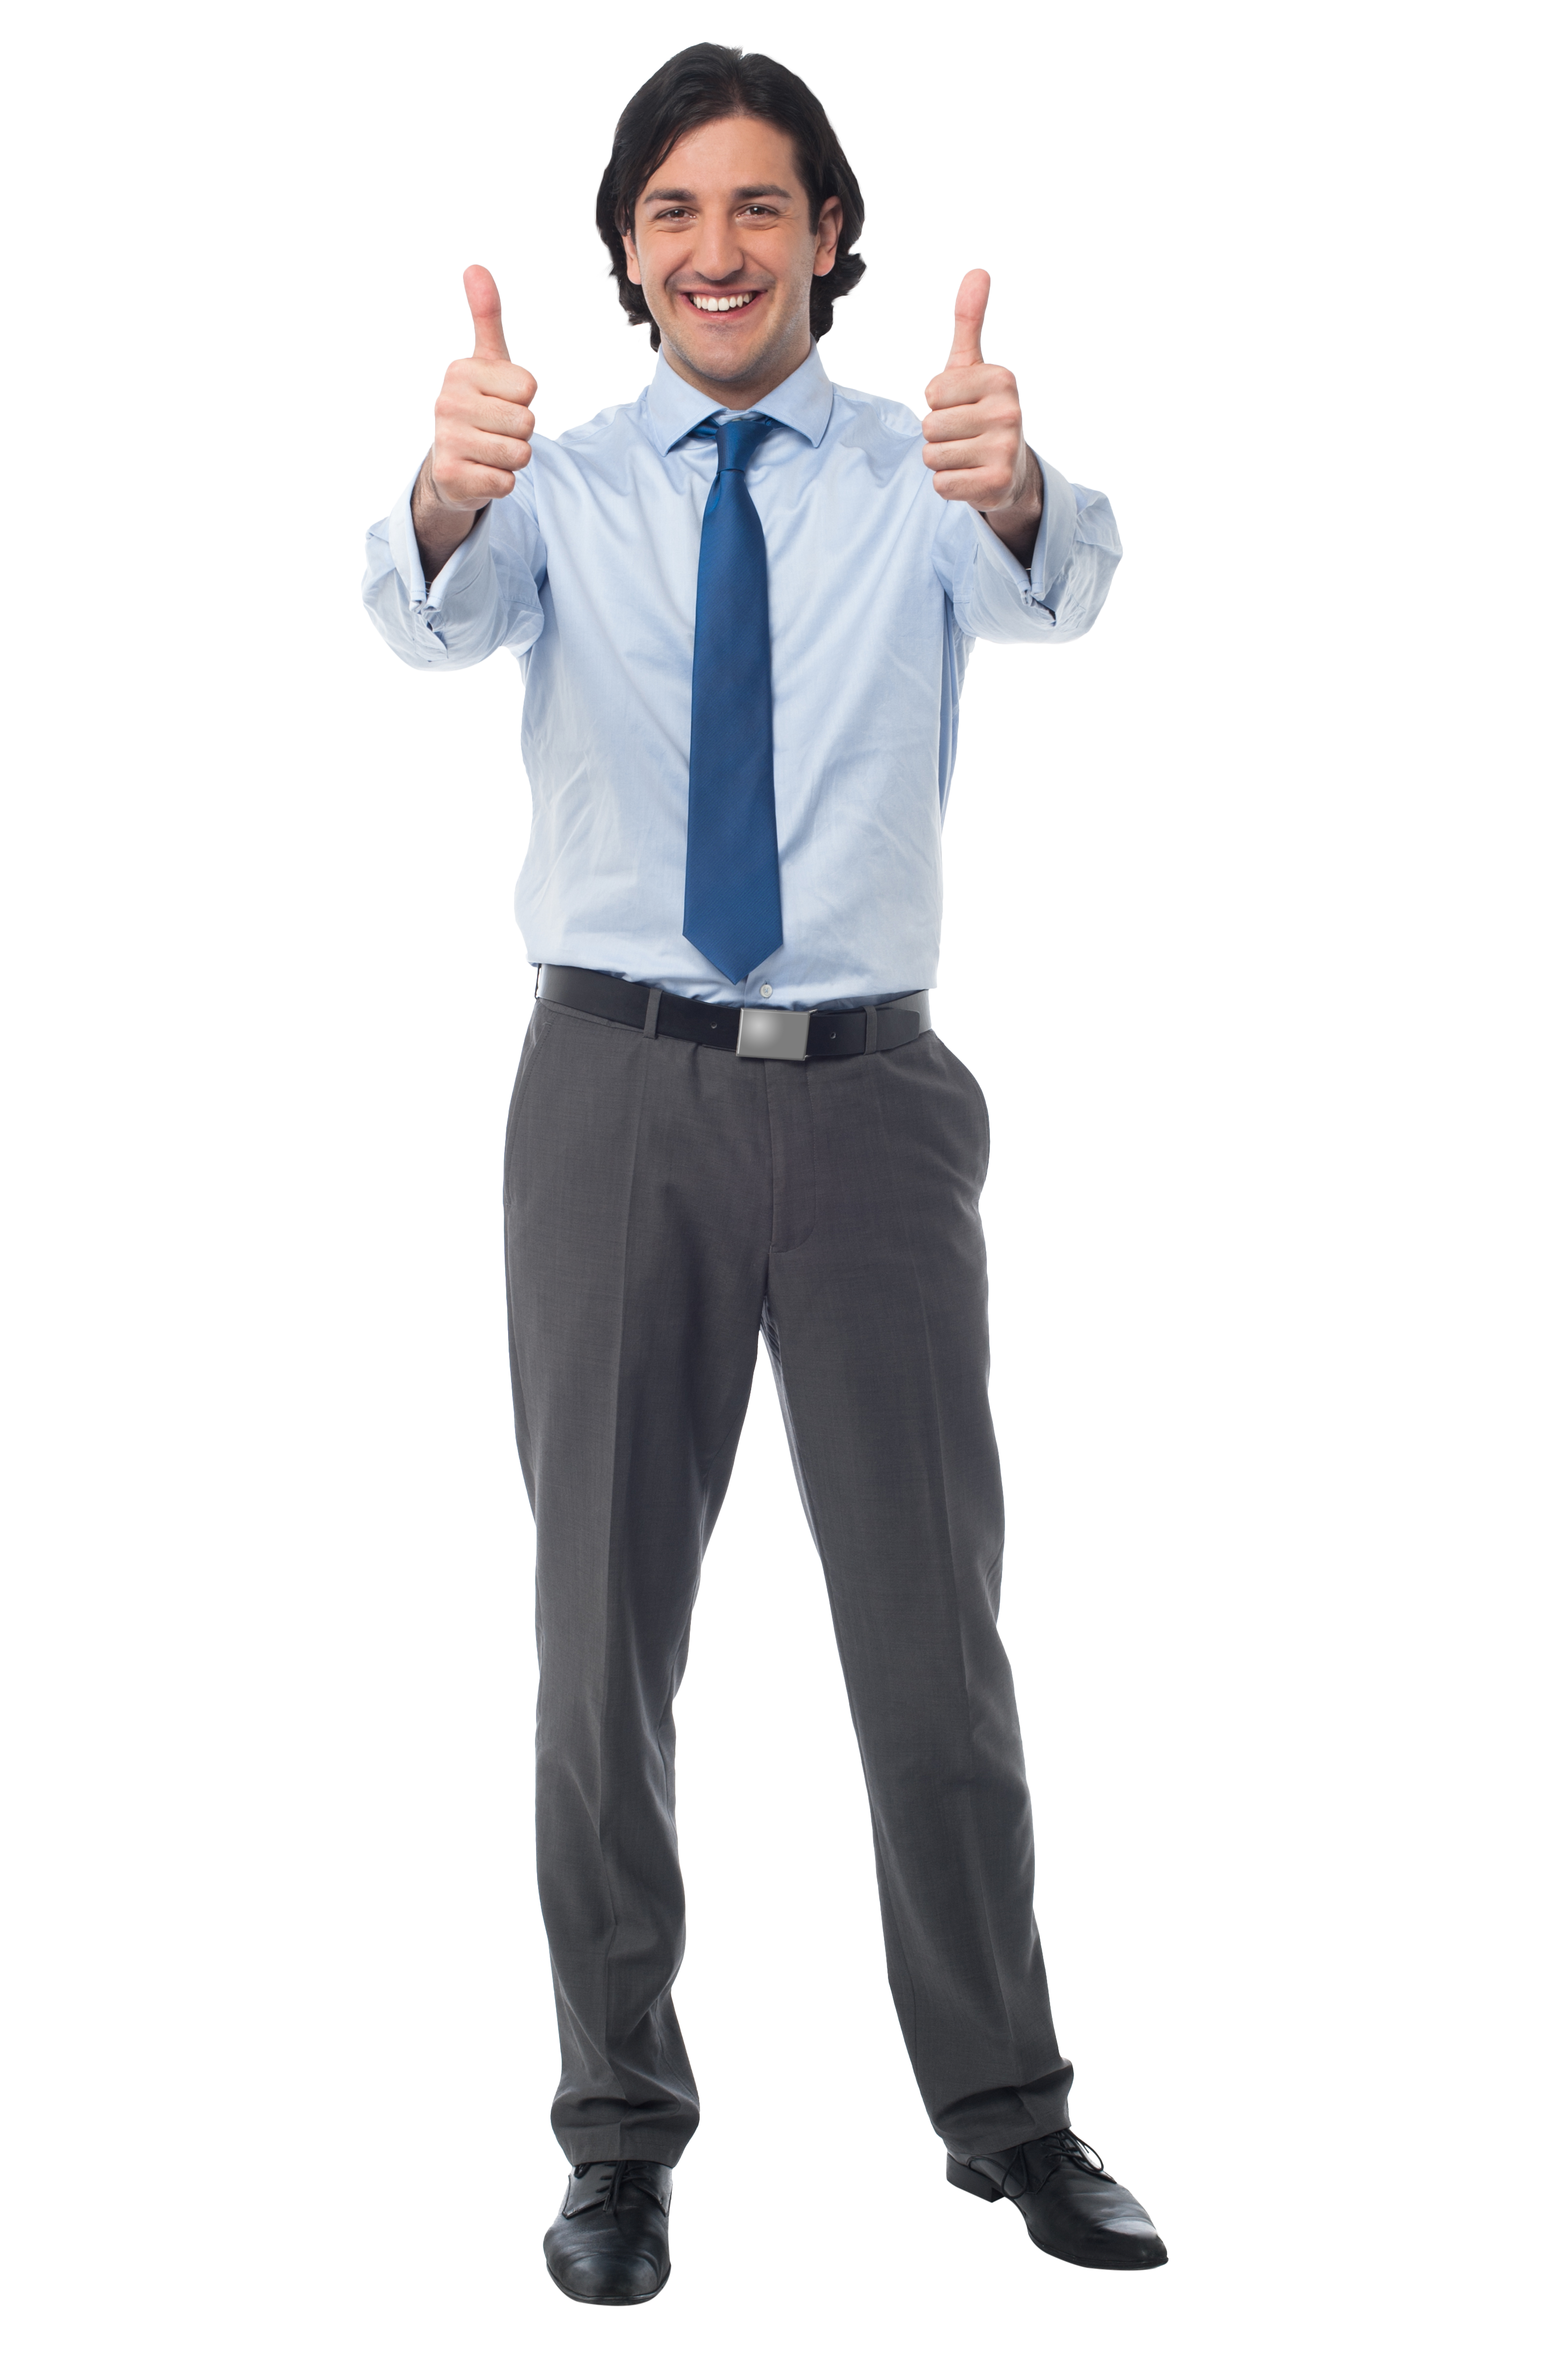 Men Pointing Thumbs Up PNG Image.